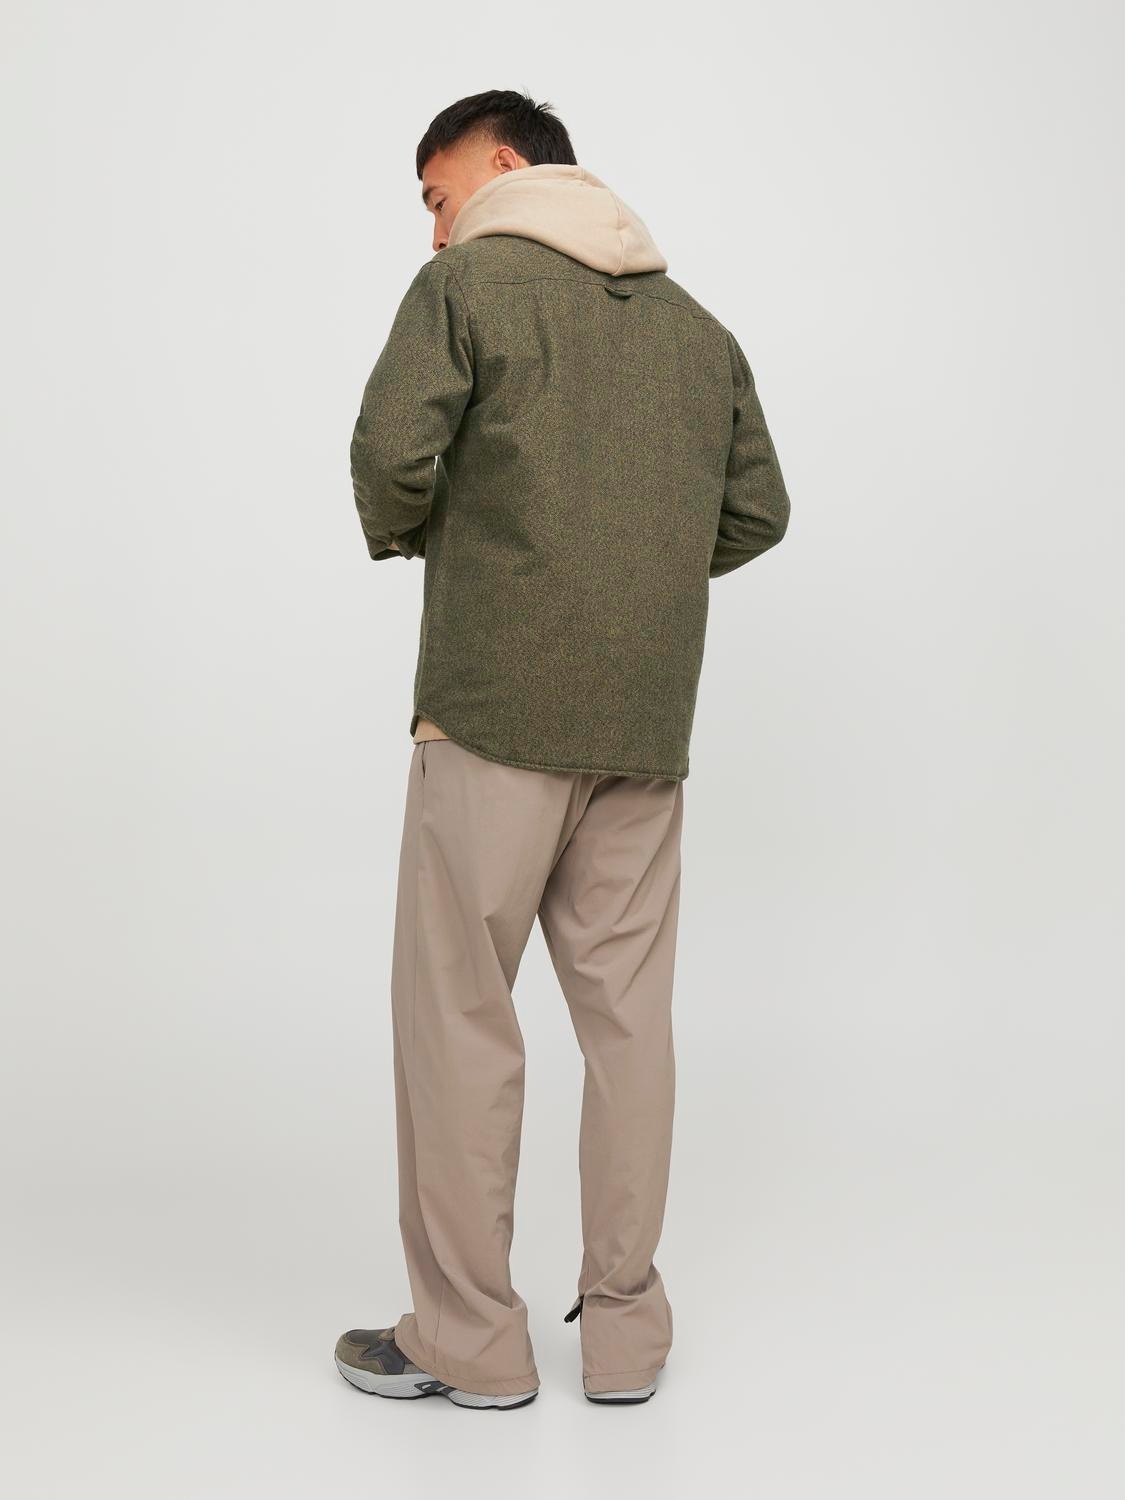 Jack & Jones Relaxed Fit Overshirt -Olive Night - 12244891